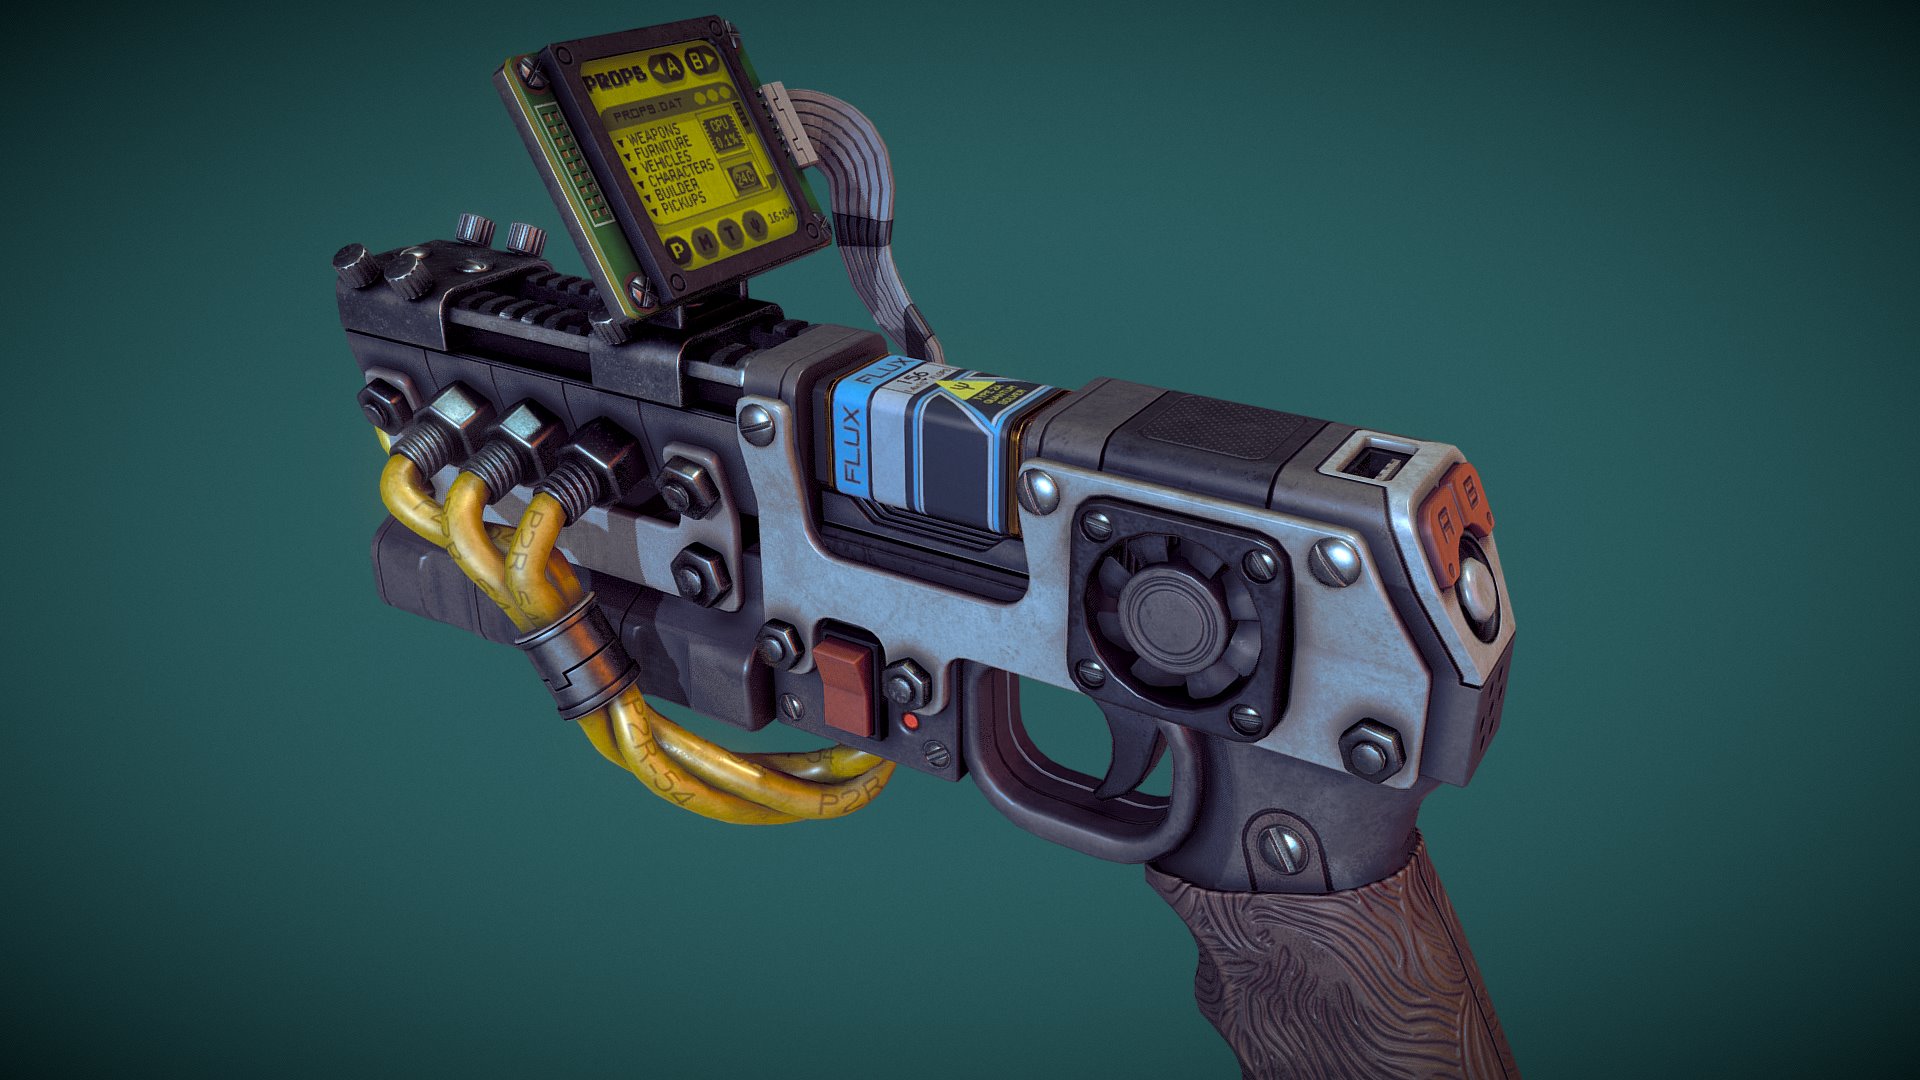 Retro Builder/Destroyer tool, insipired by Gmod's propgun, styled after the original gameboy.

Modelled in Maya 2018 textured in substance painter 2 3d model